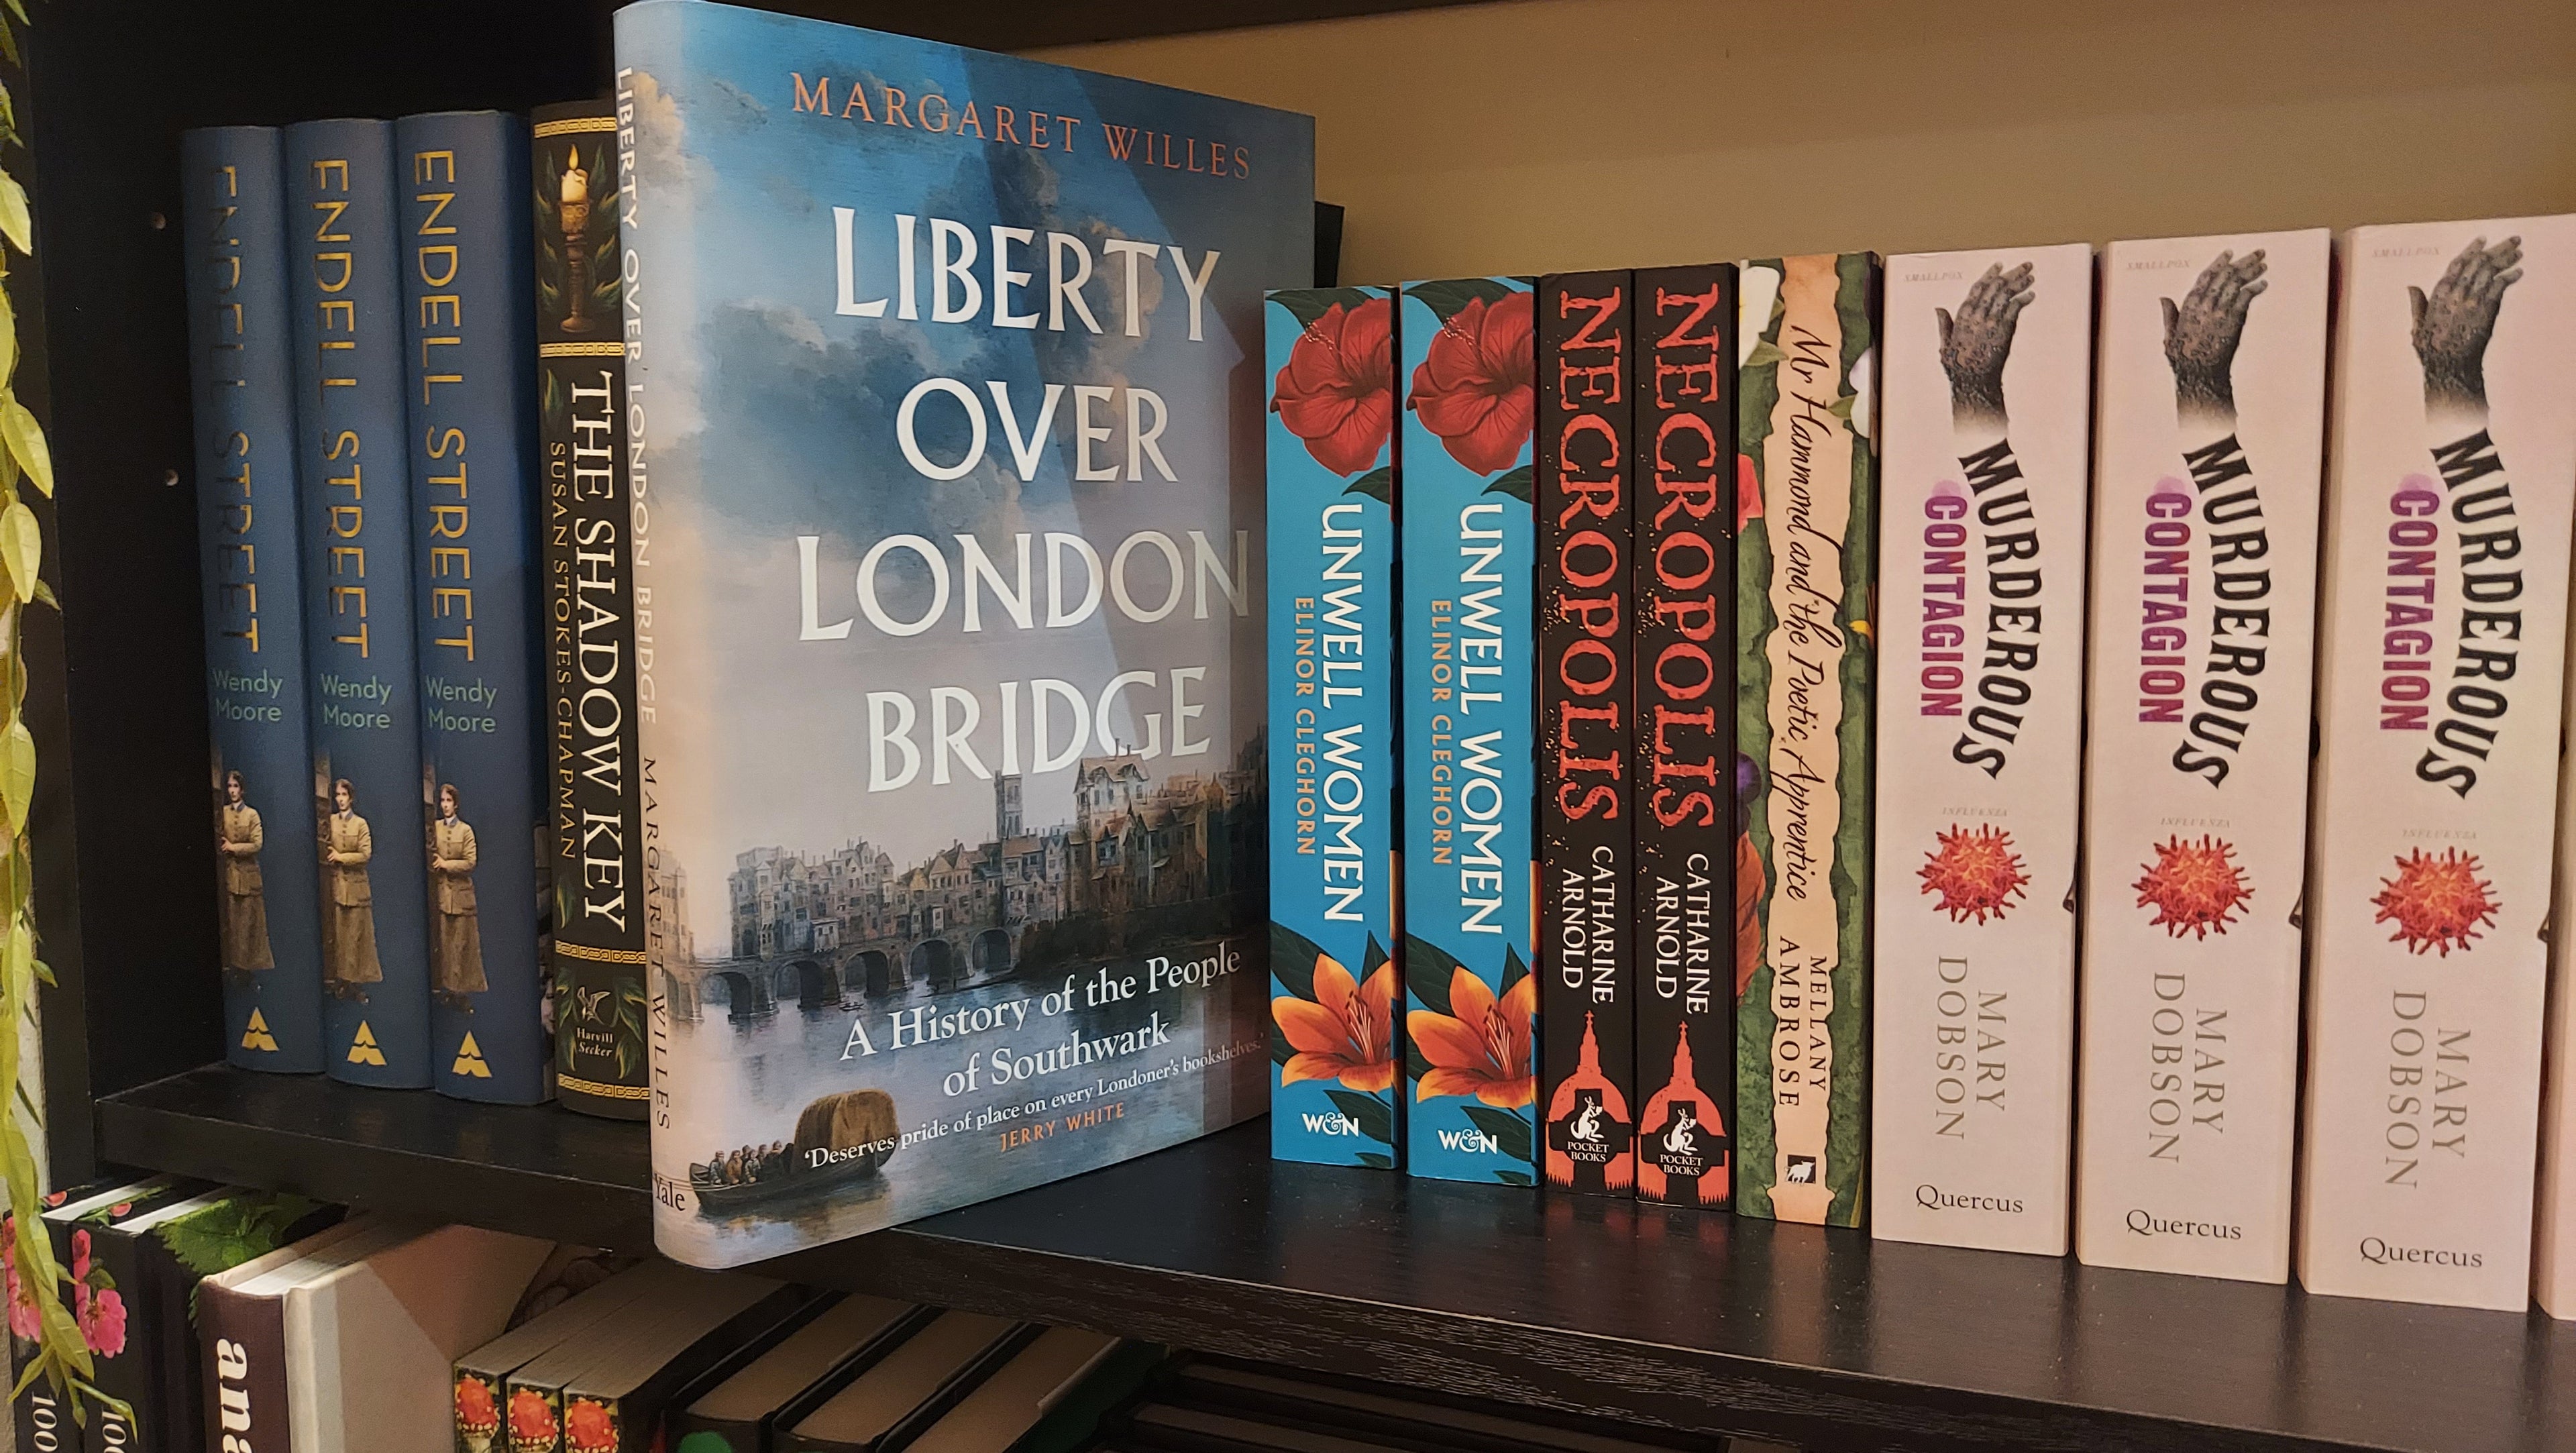 A row of books on a shelf, with Liberty over London Bridge pulled out to reveal its cover